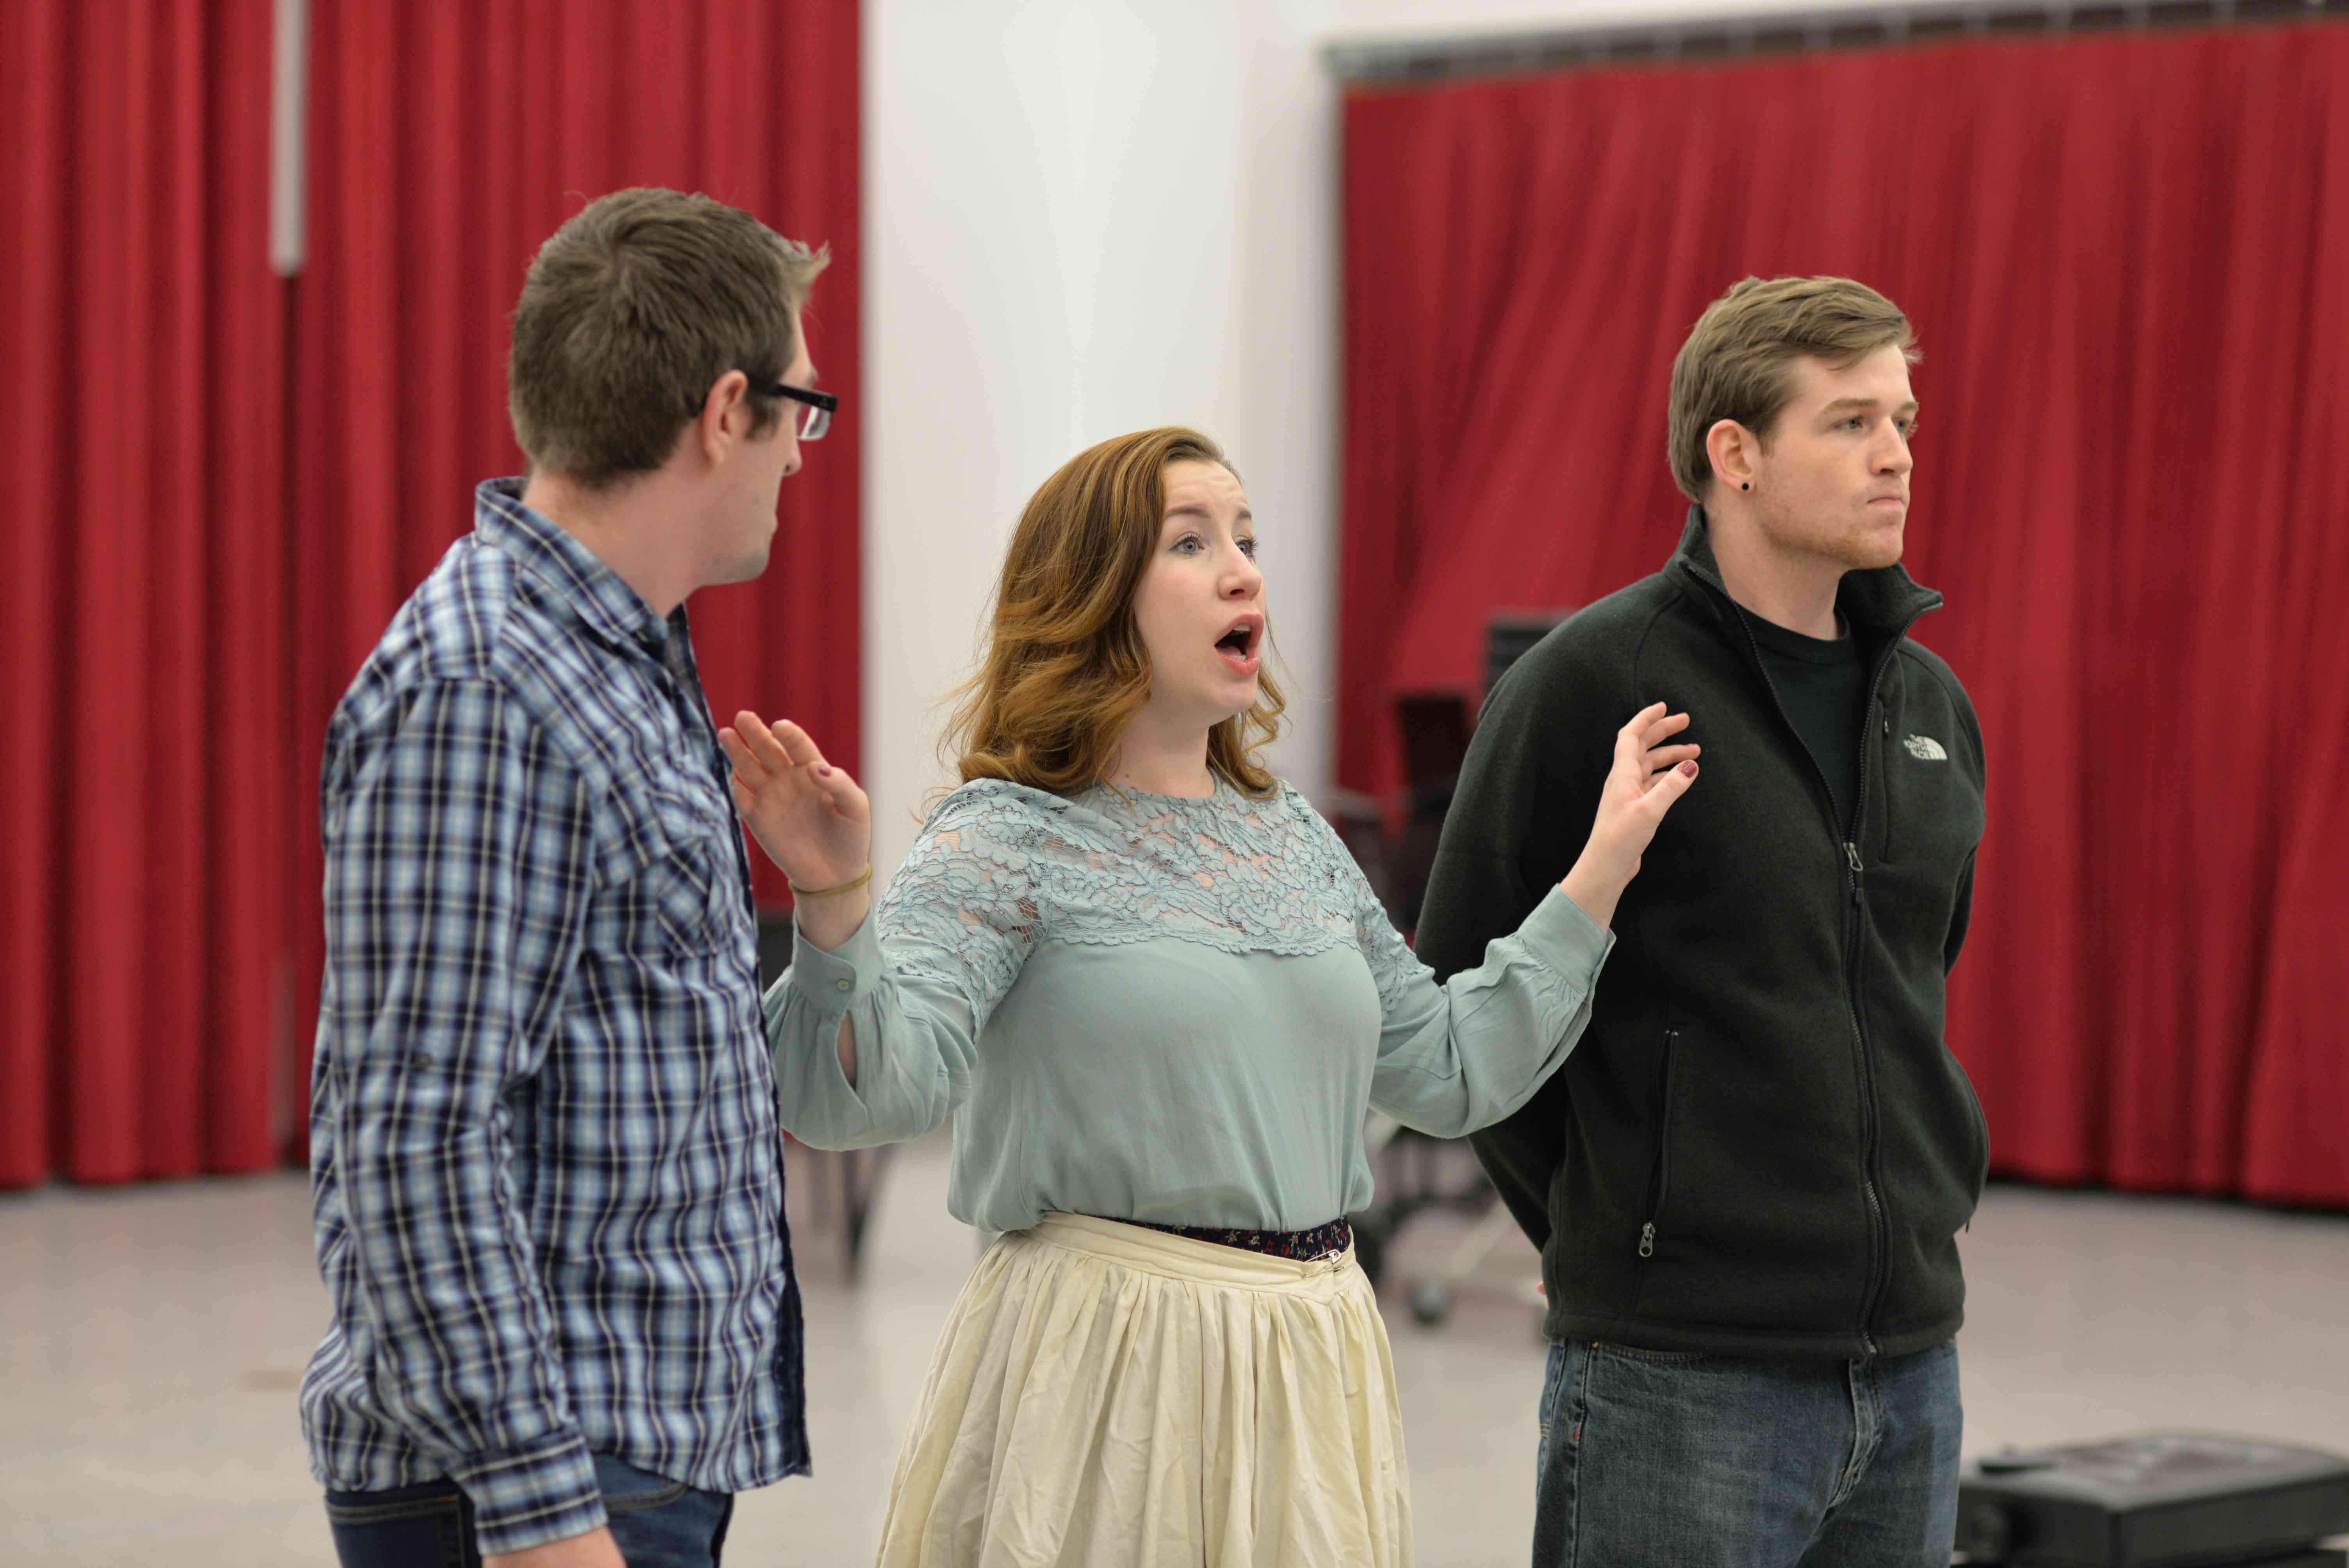 rehearsal photo from Tales of Hoffmann